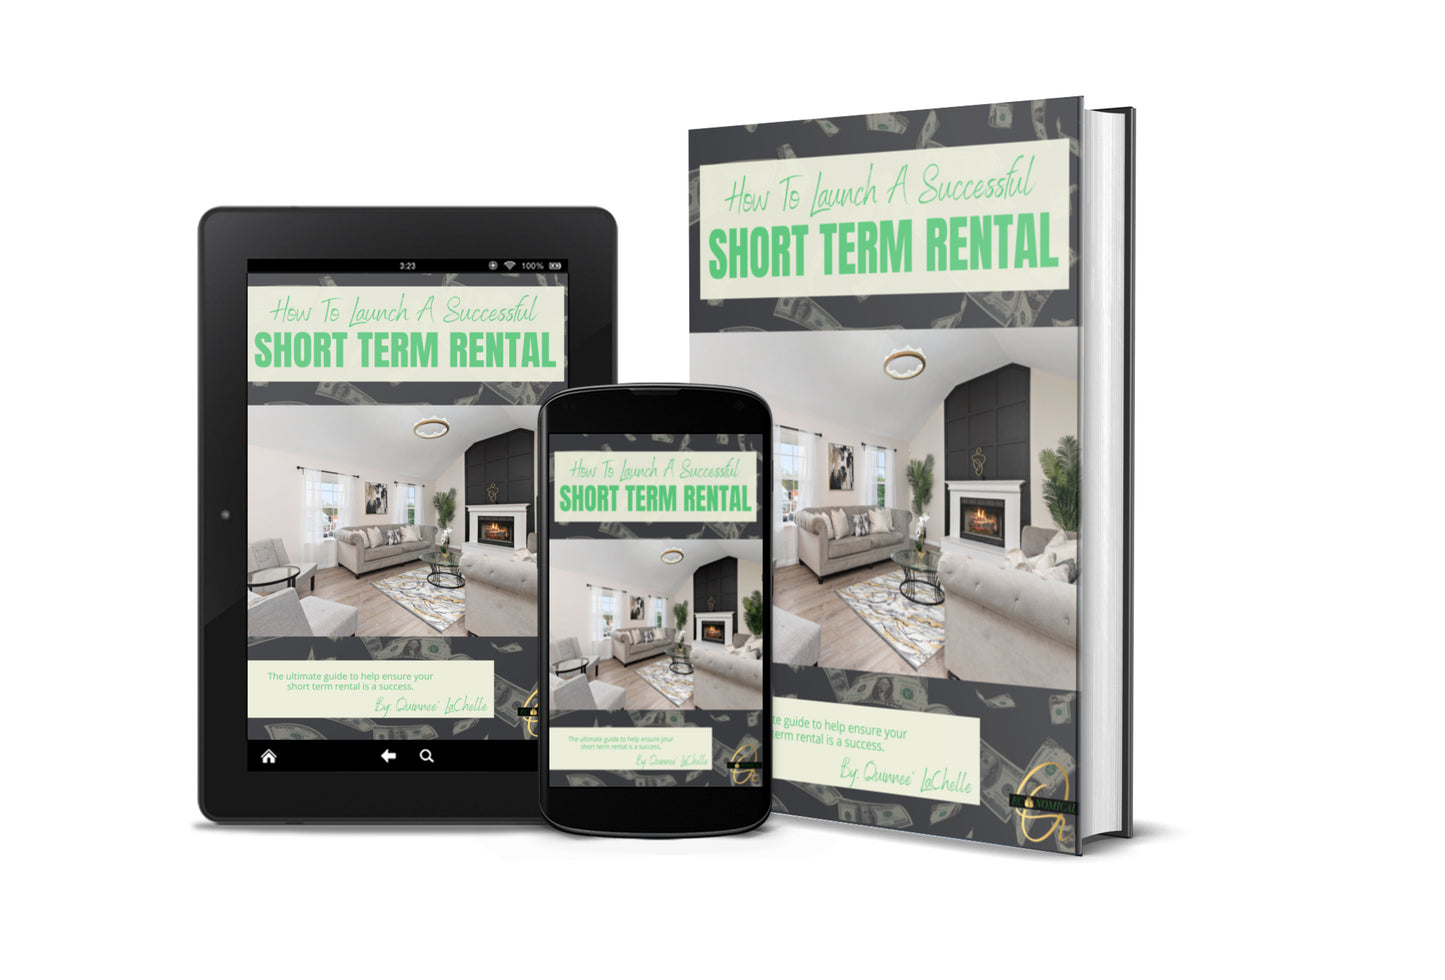 eBook: How to Launch A Successful Short Term Rental